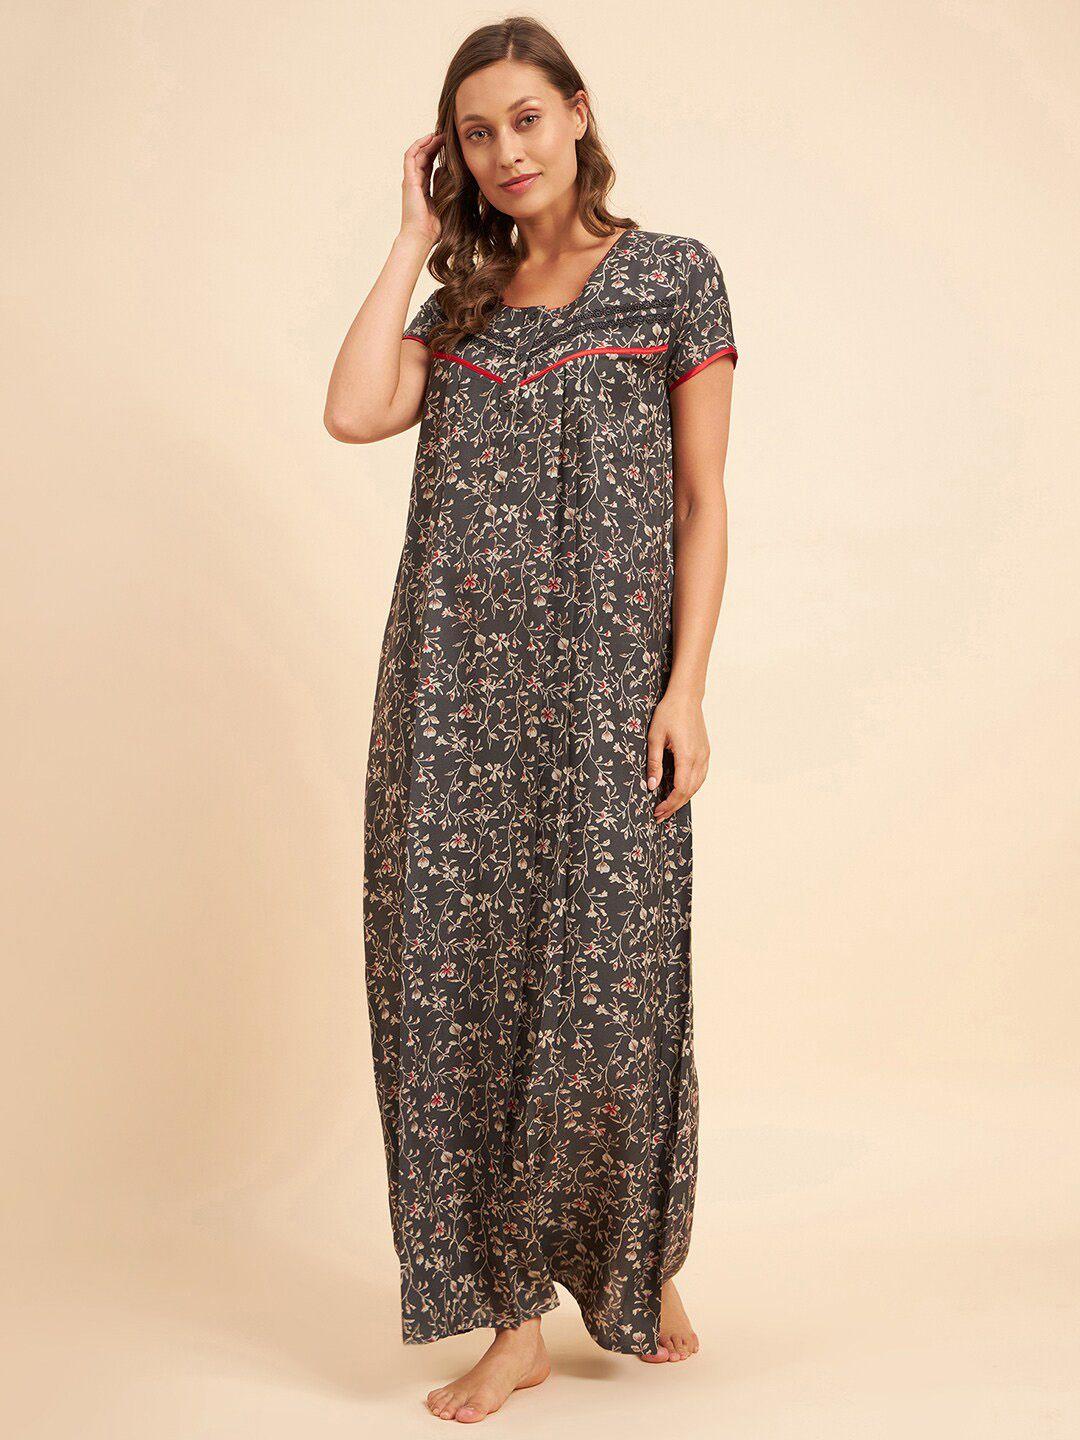 sweet-dreams-grey-&-white-floral-printed-maxi-nightdress